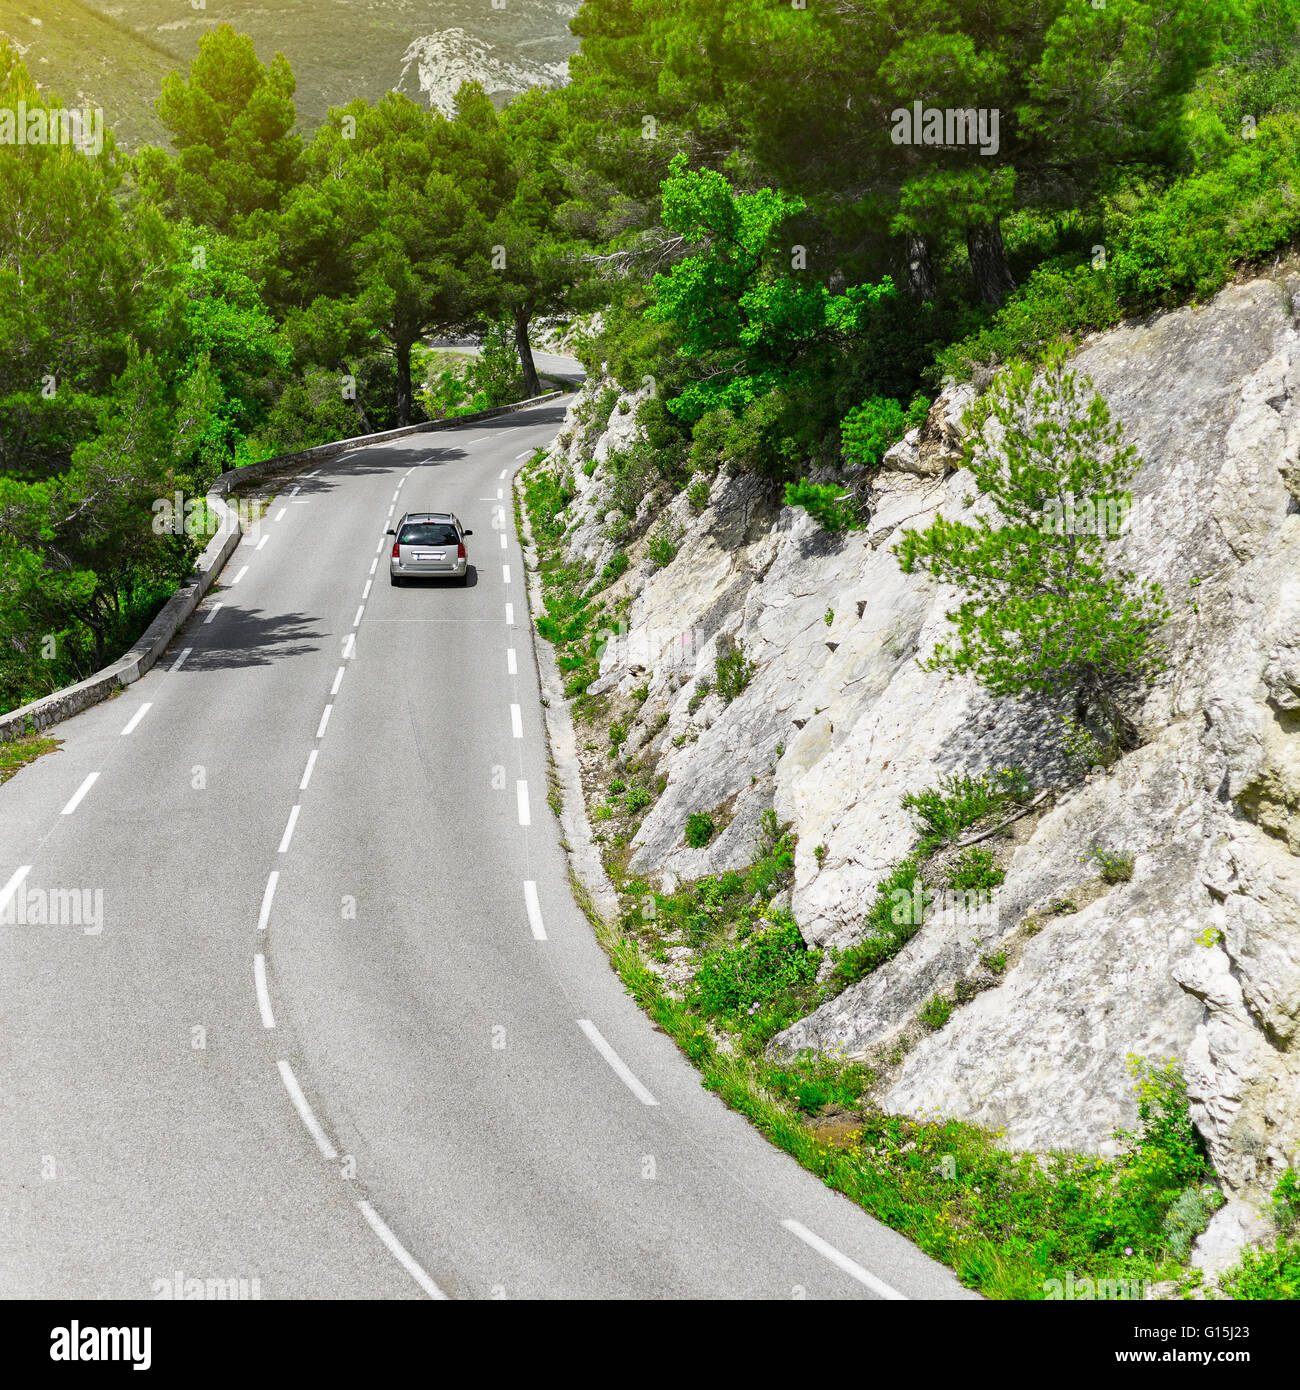 hatchback family station wagon car driving on a mountain road in a national park Stock Photo